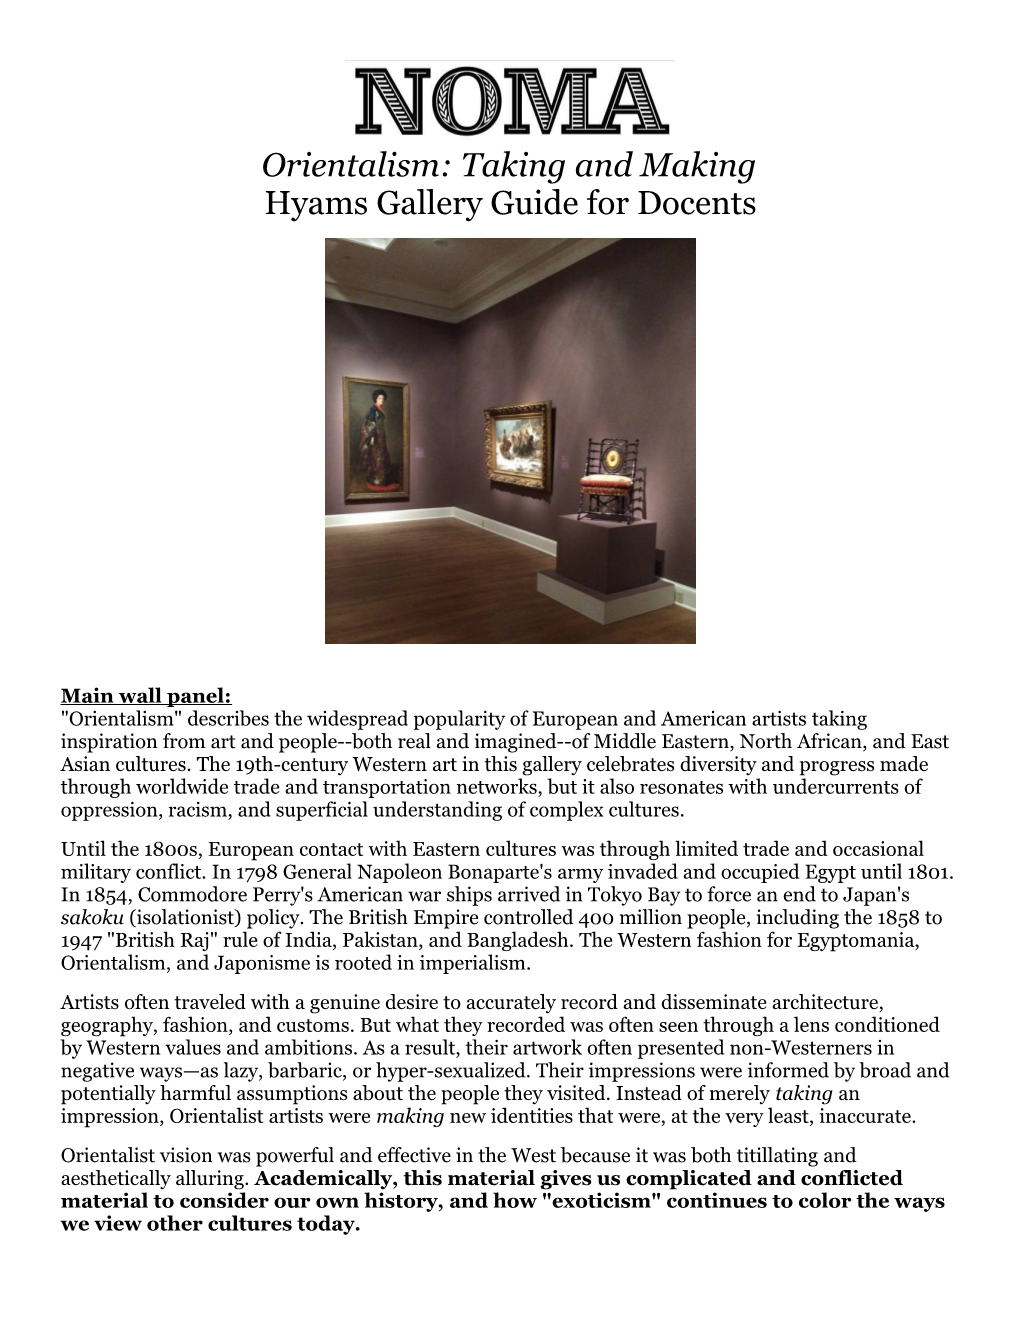 Orientalism: Taking and Making Hyams Gallery Guide for Docents